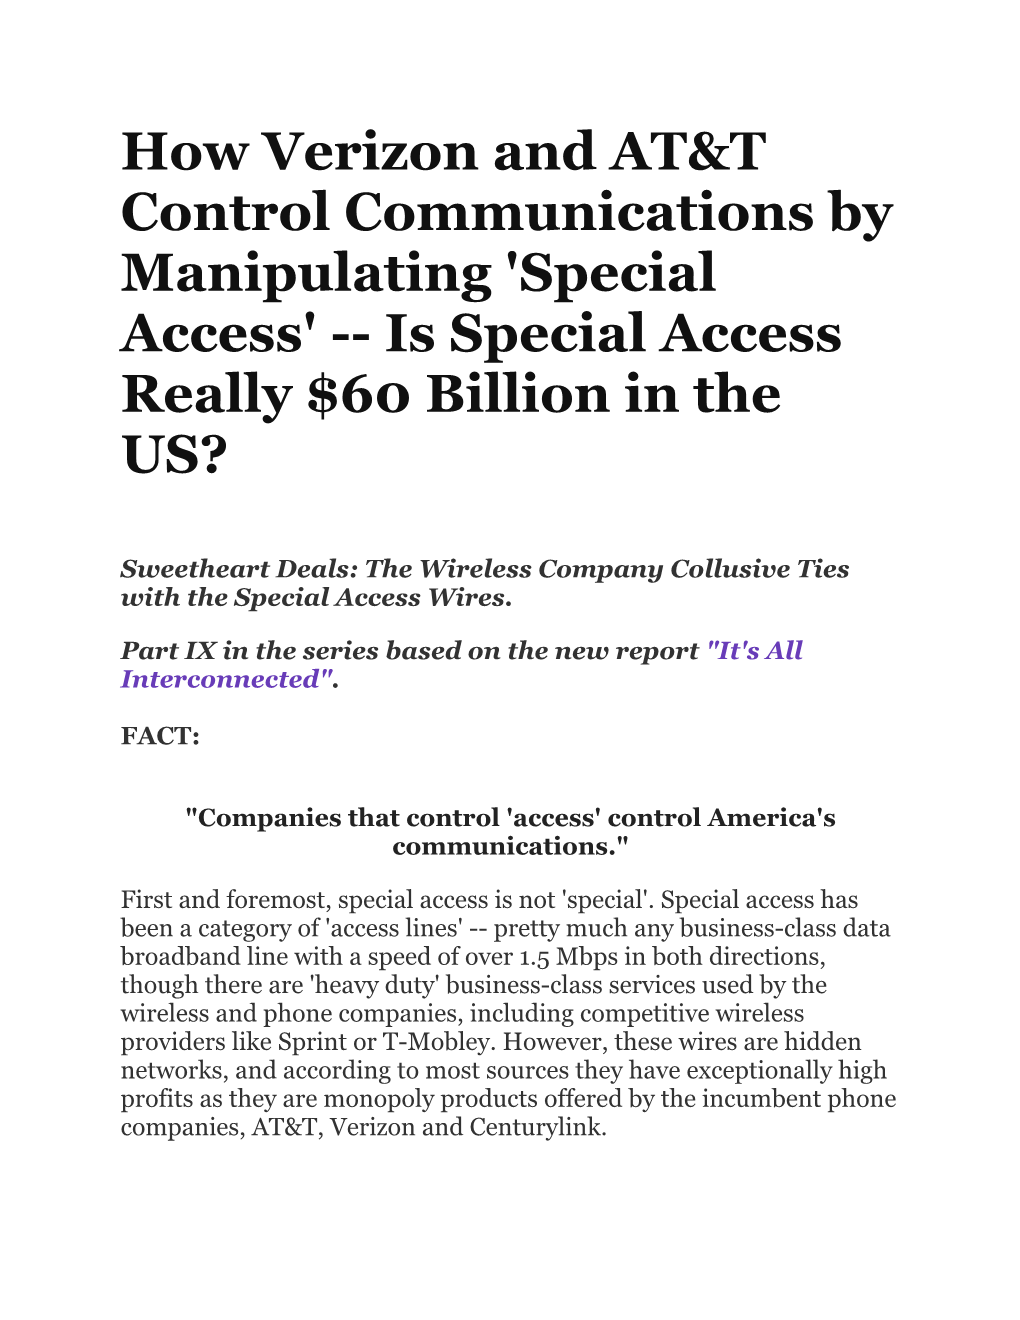 How Verizon and AT&T Control Communications by Manipulating 'Special Access' -- Is Special Access Really $60 Billion In